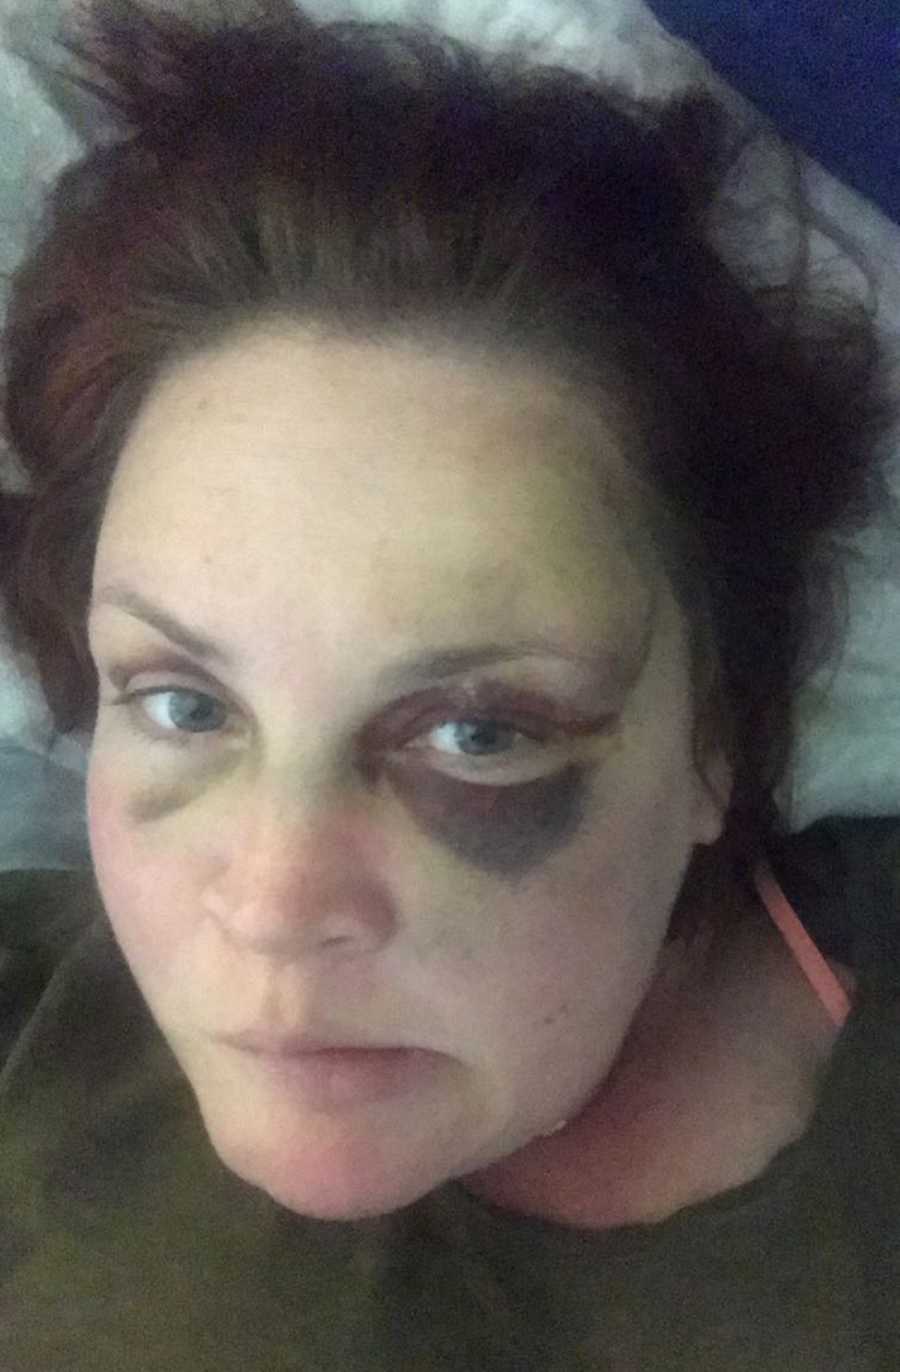 Alcoholic woman takes selfie with swollen and purple eye after she fell